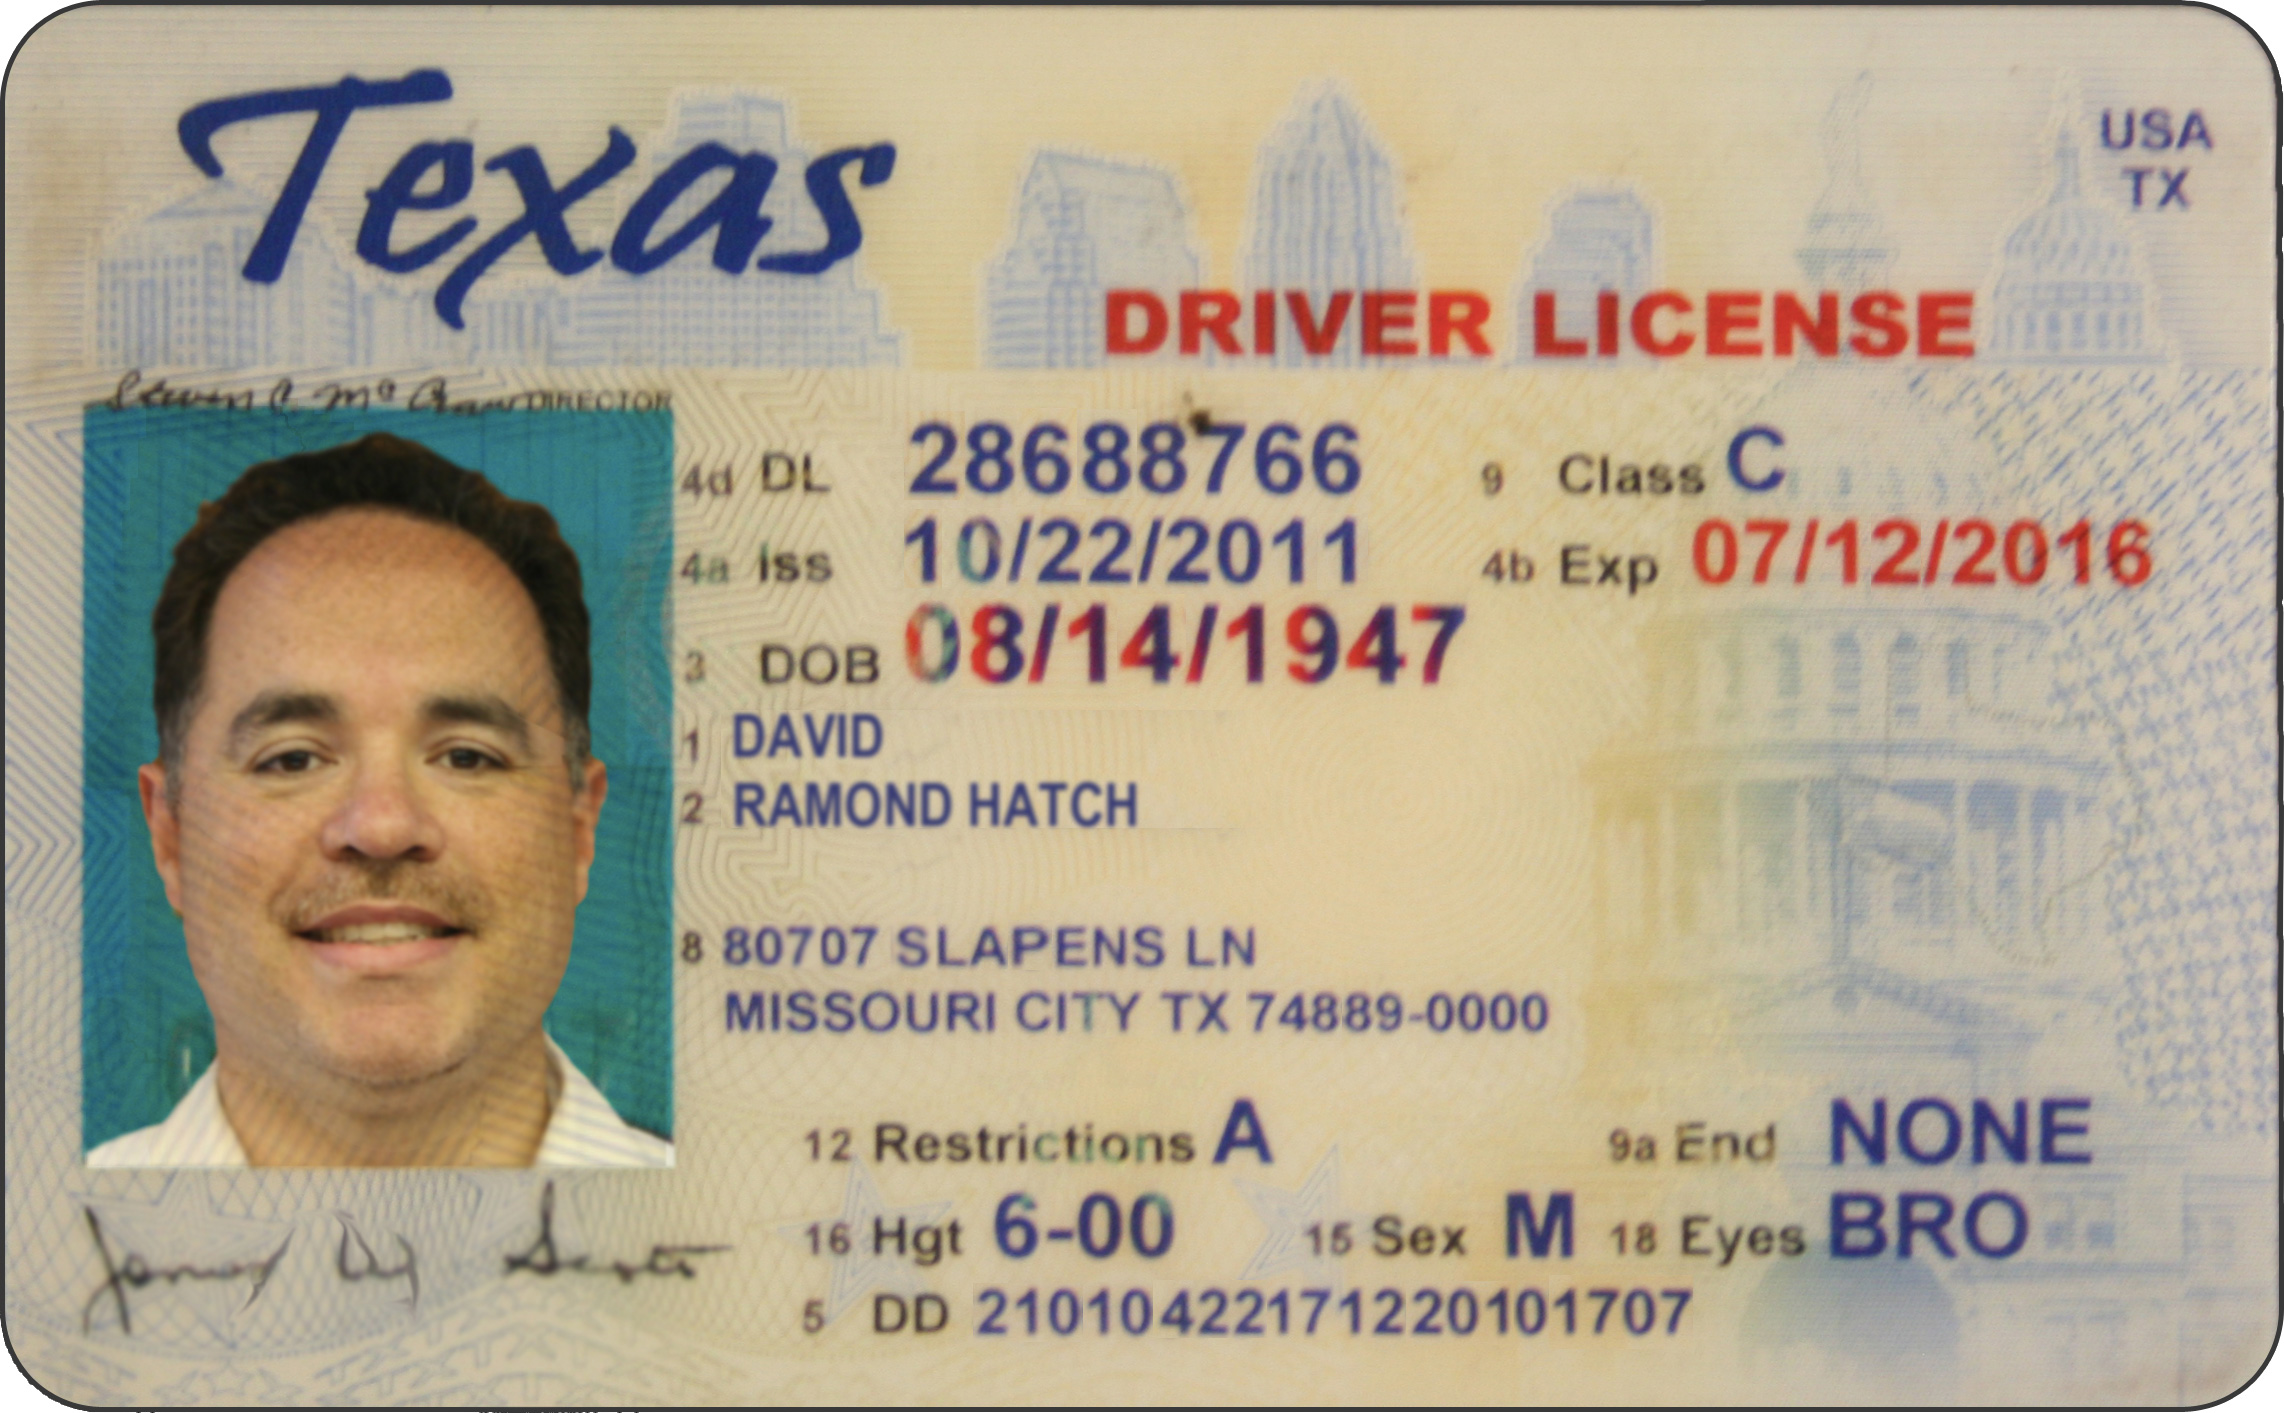 Texas drivers license audit number on 2016